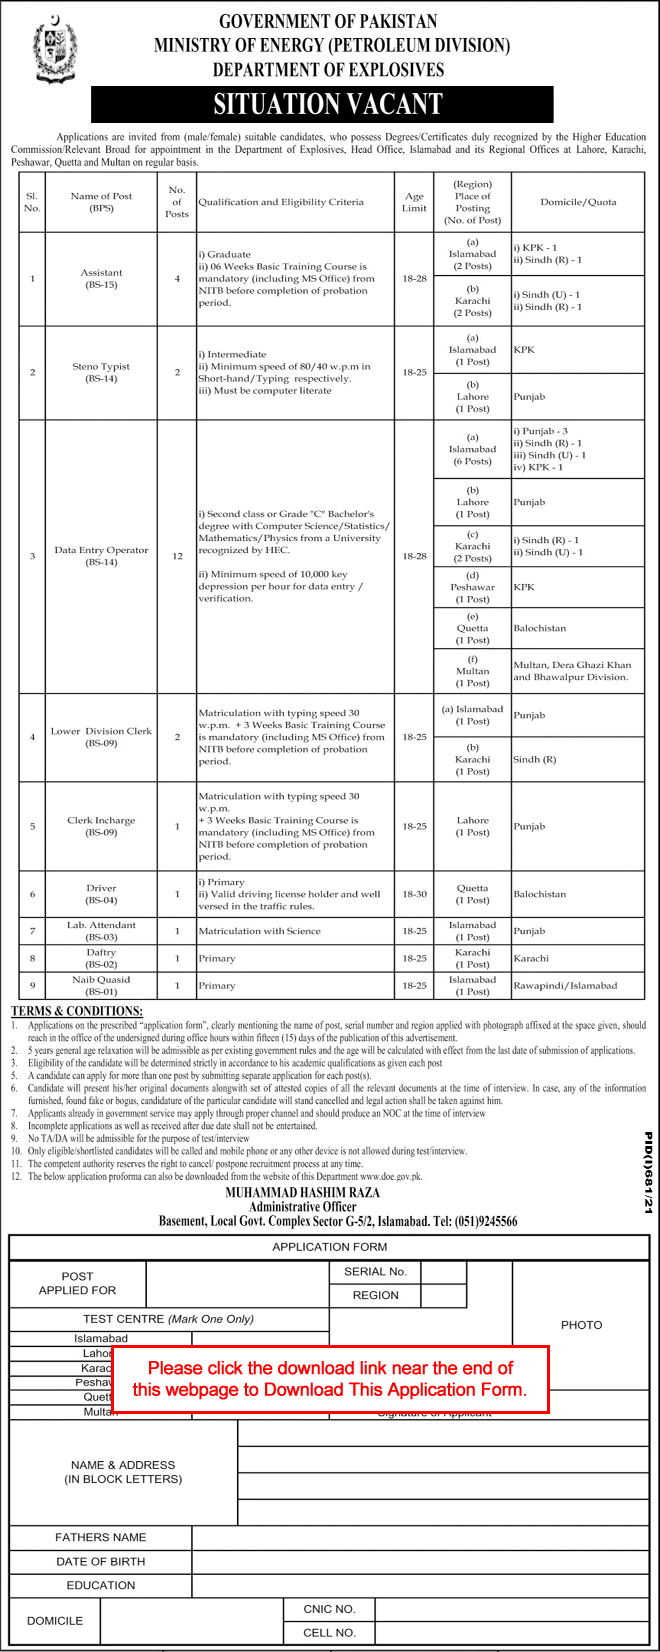 Ministry of Energy Petroleum Division Jobs 2021 August Application Form Data Entry Operators & Others Latest